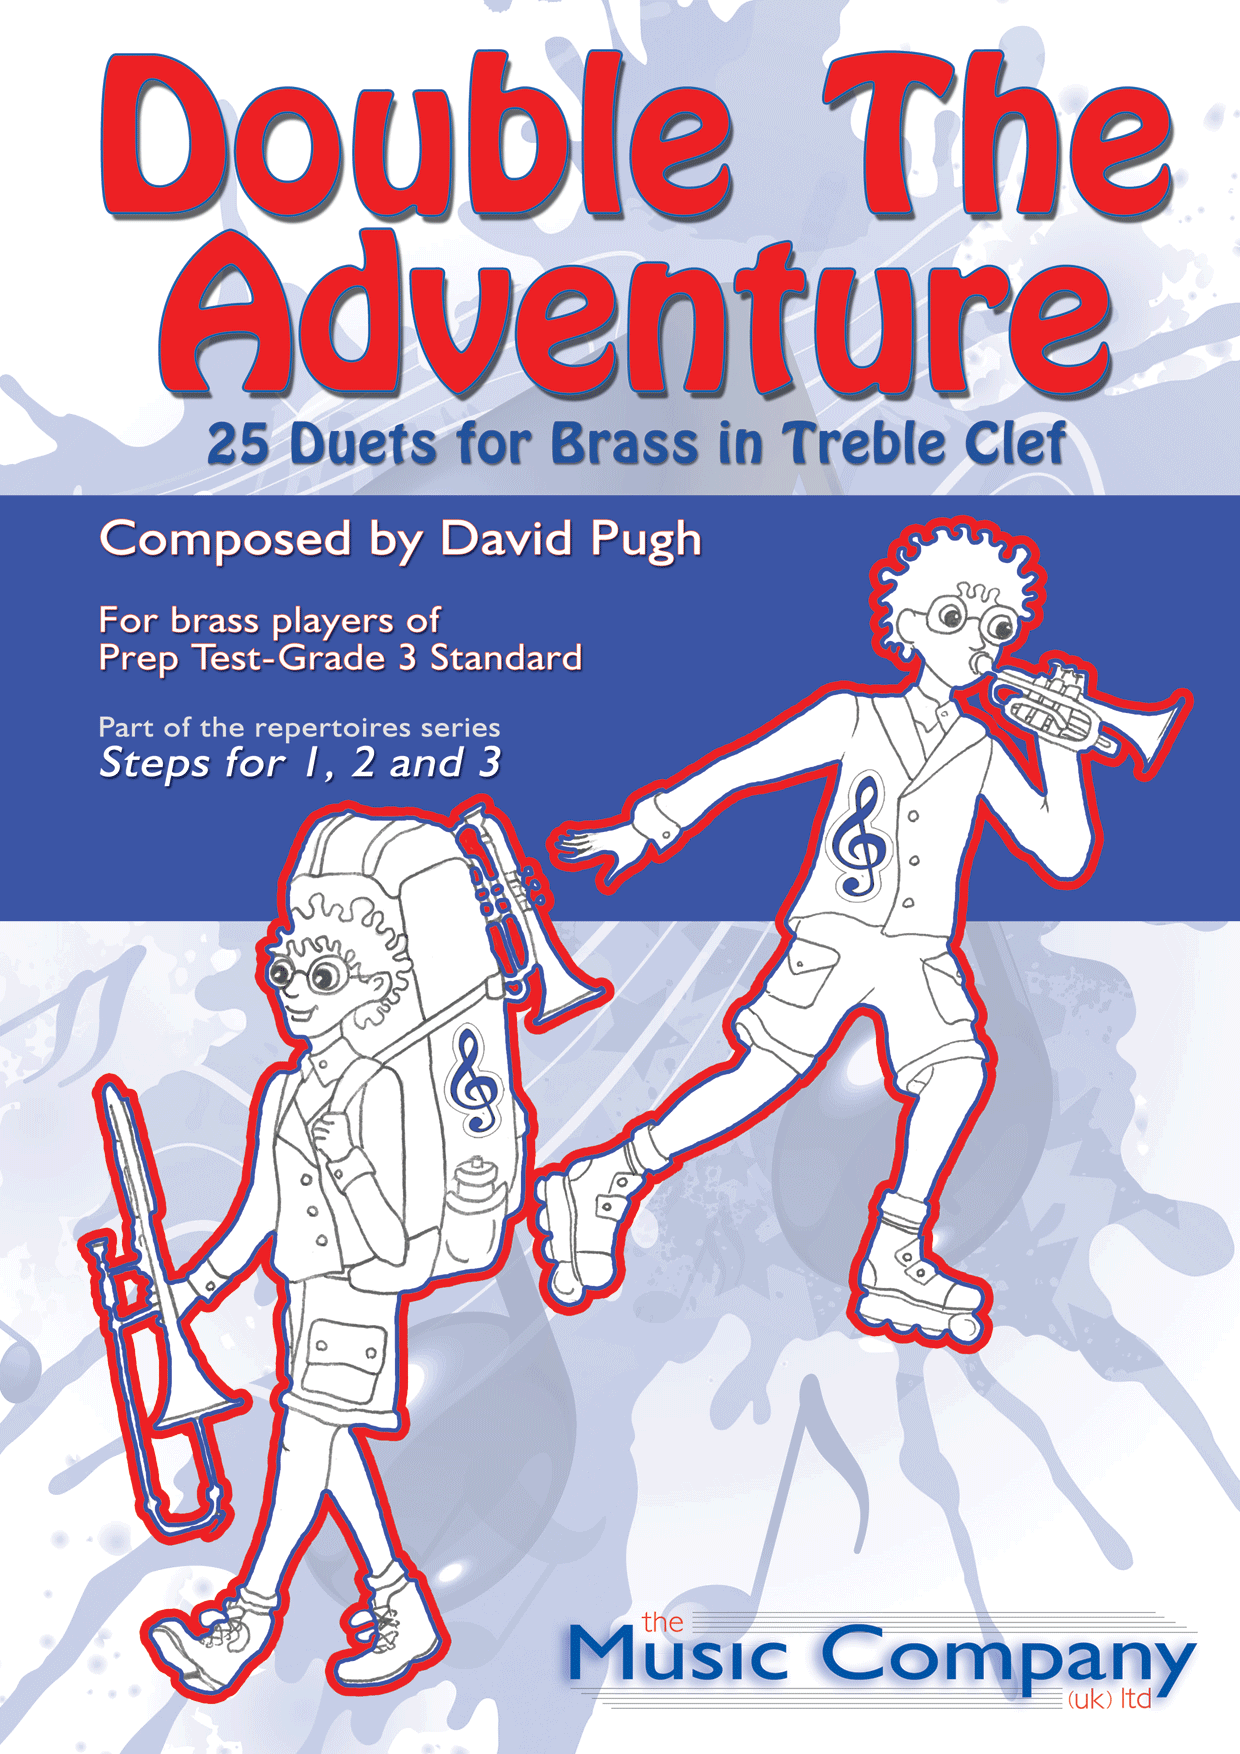 Double The Adventure by David Pugh